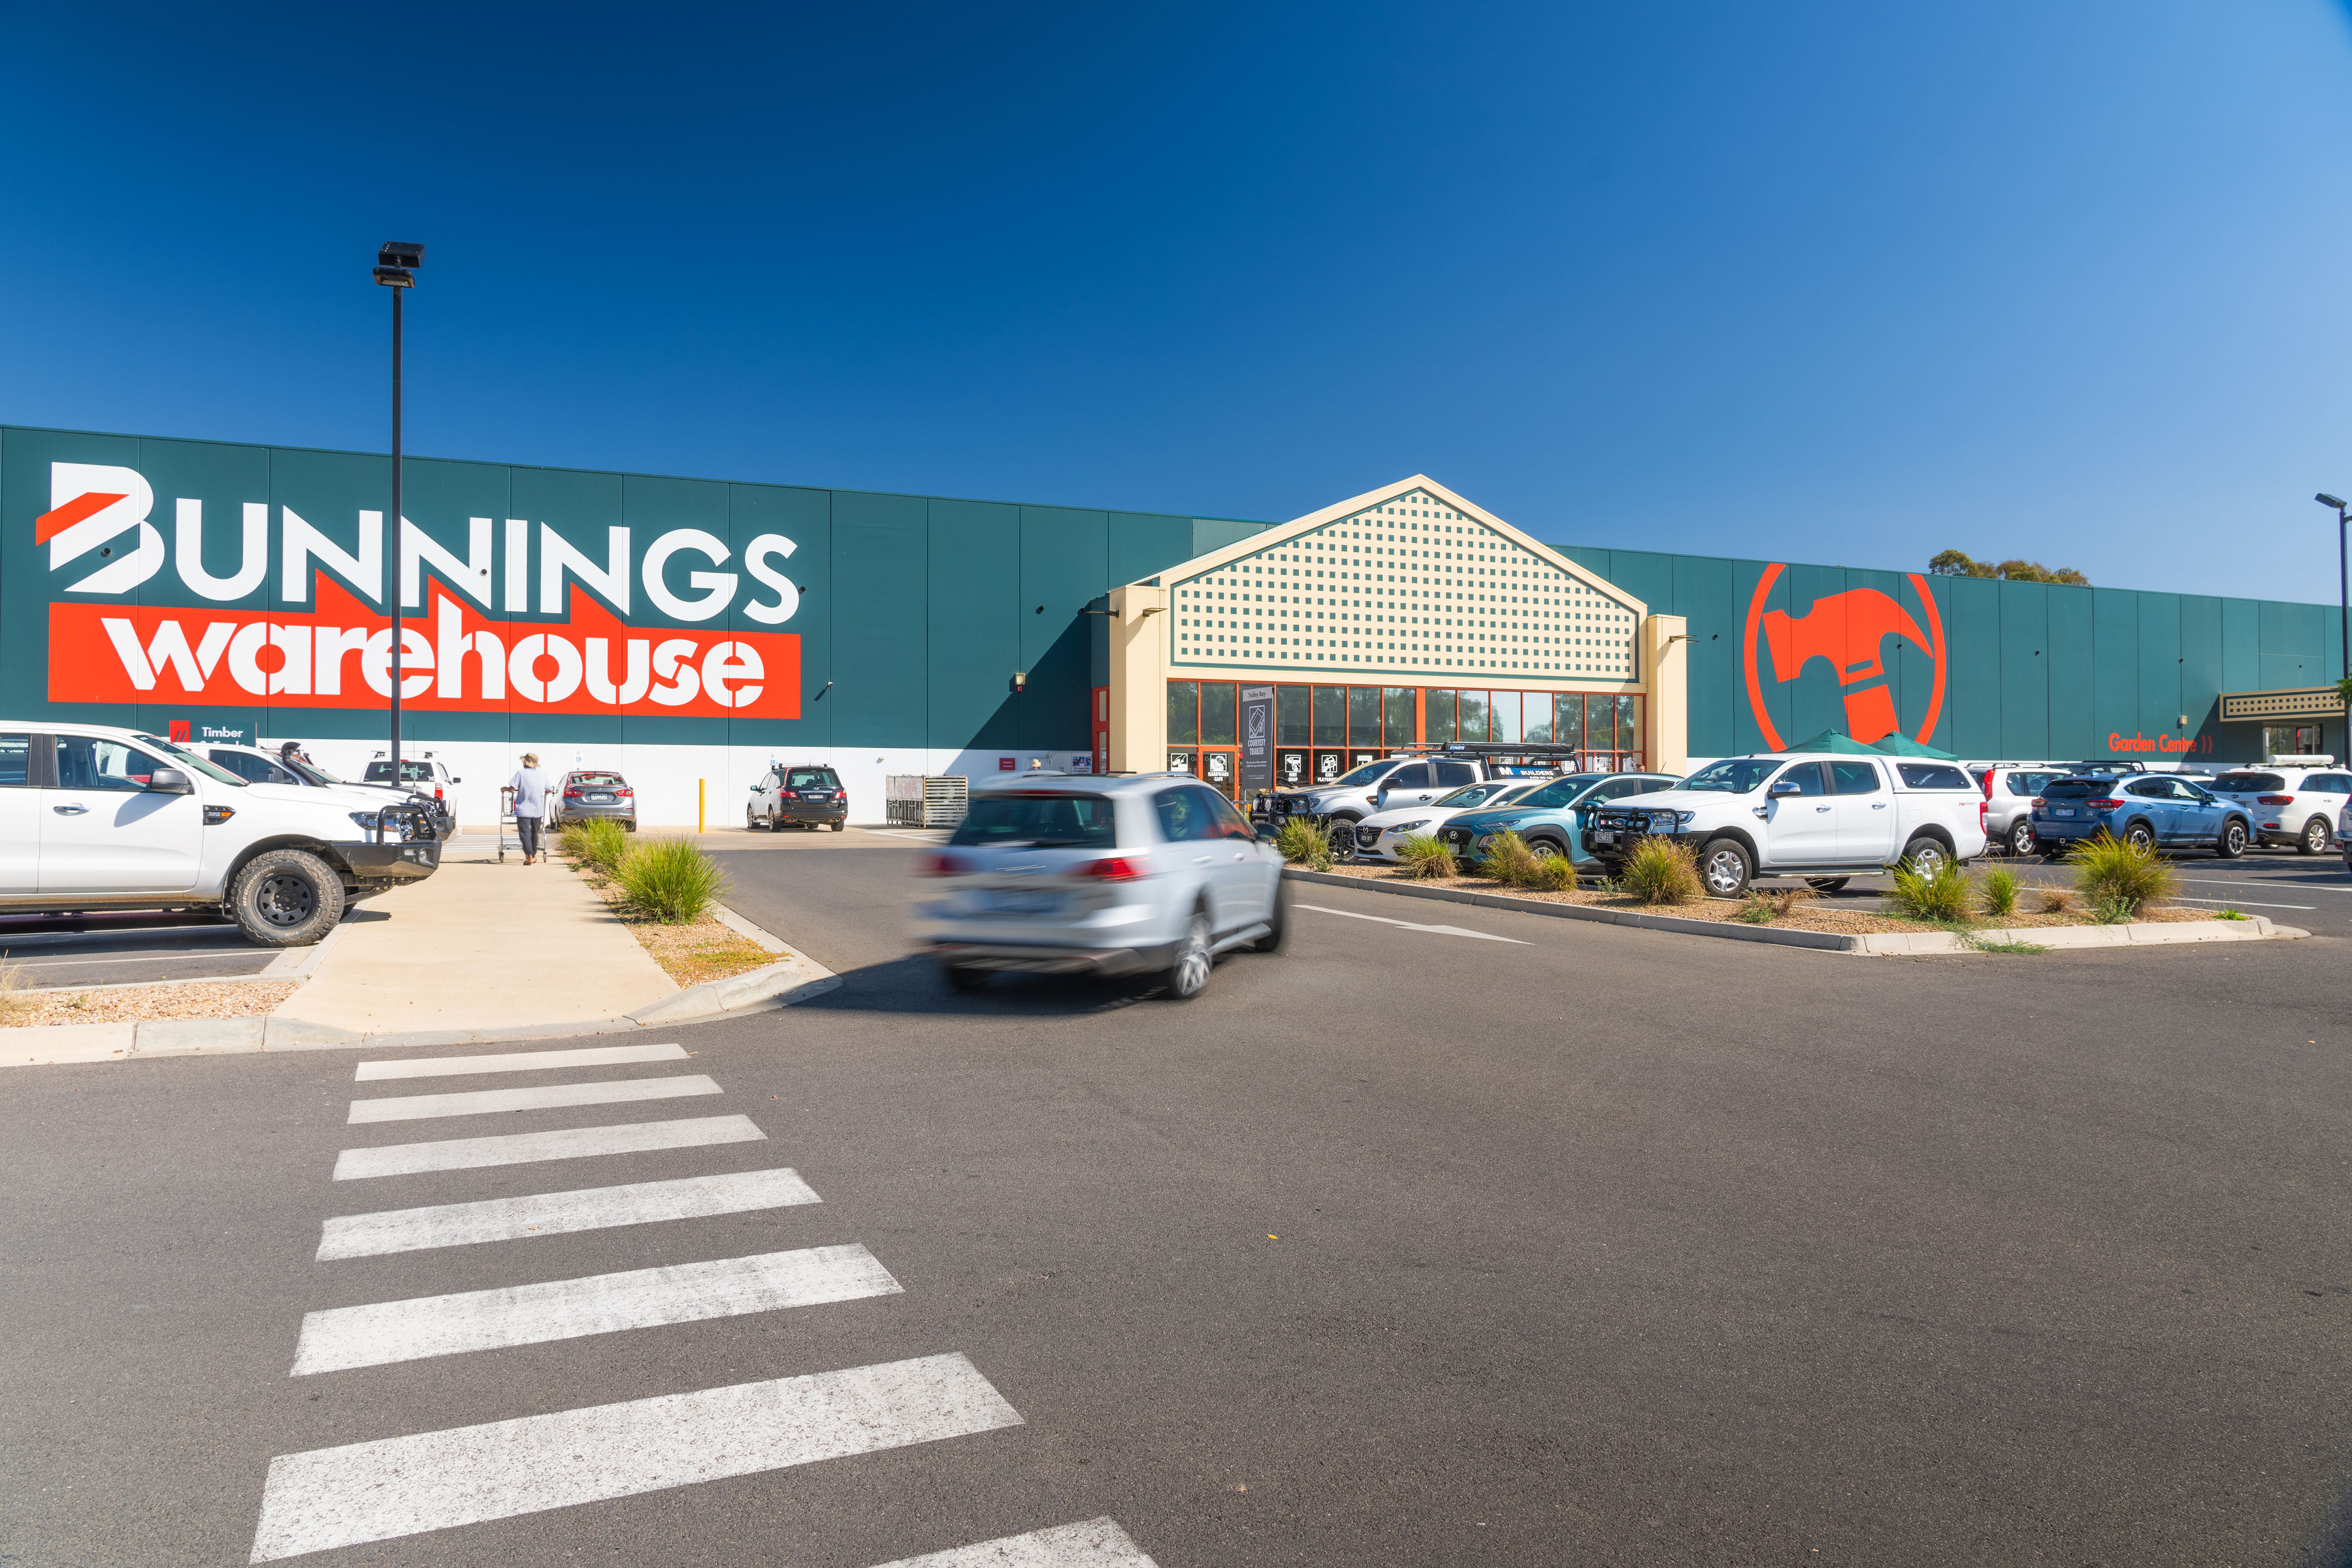 Bunnings Warehouse - Lowest prices were just the beginning, but no longer.